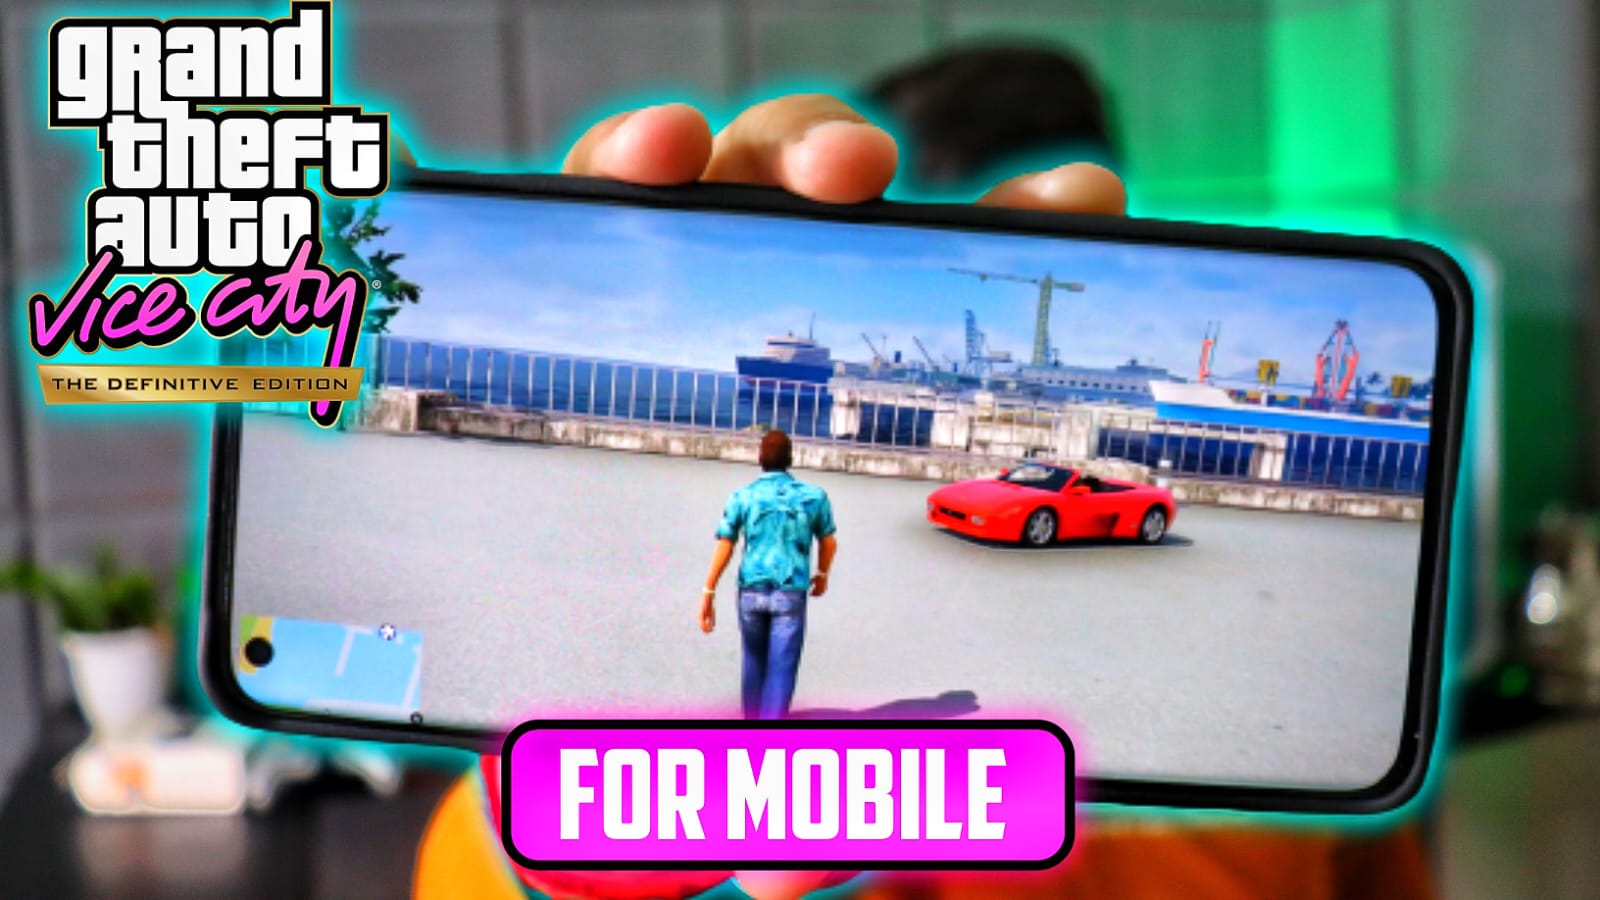 Gta vice city+definitive edition for android 